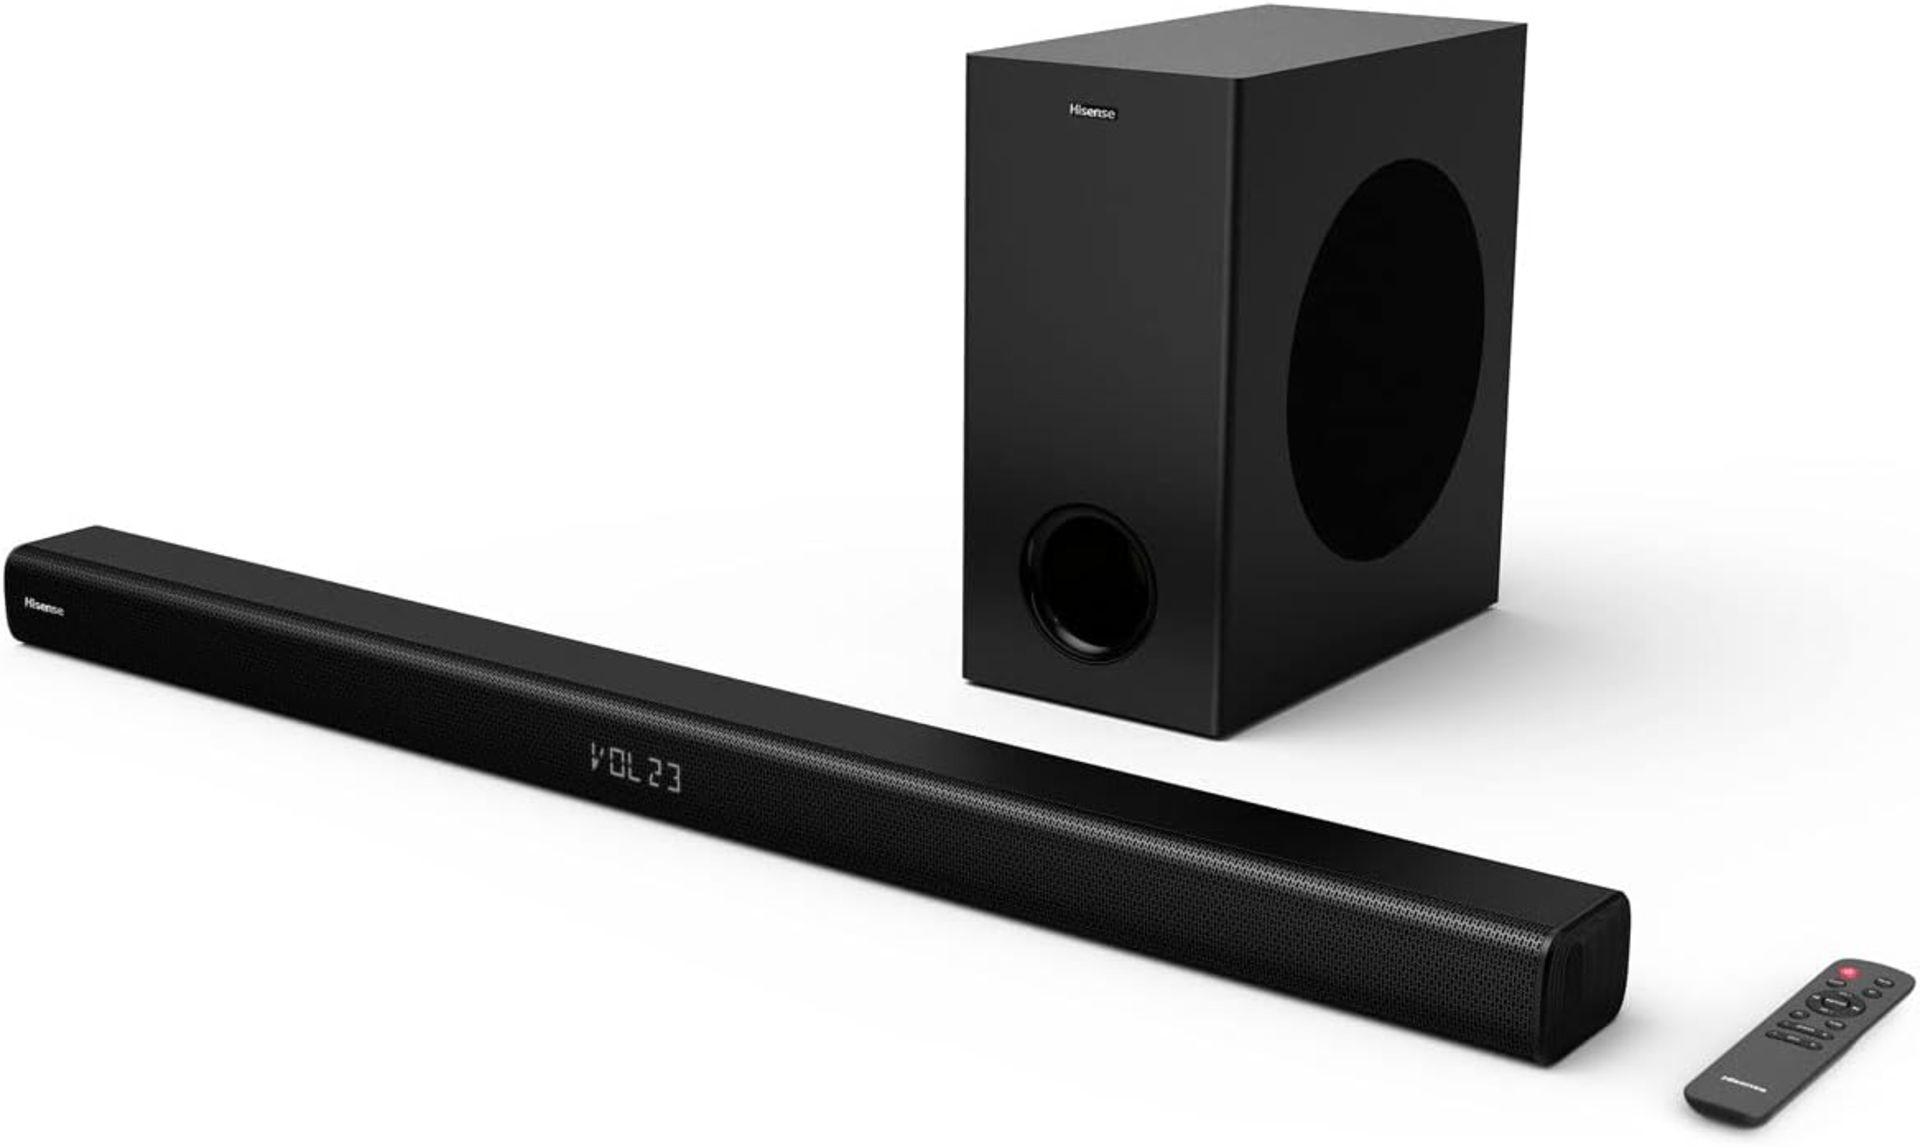 BRAND NEW FACTORY SEALED Hisense HS218 2.1ch 200w Sound Bar with Wireless Subwoofer. RRP £169. (